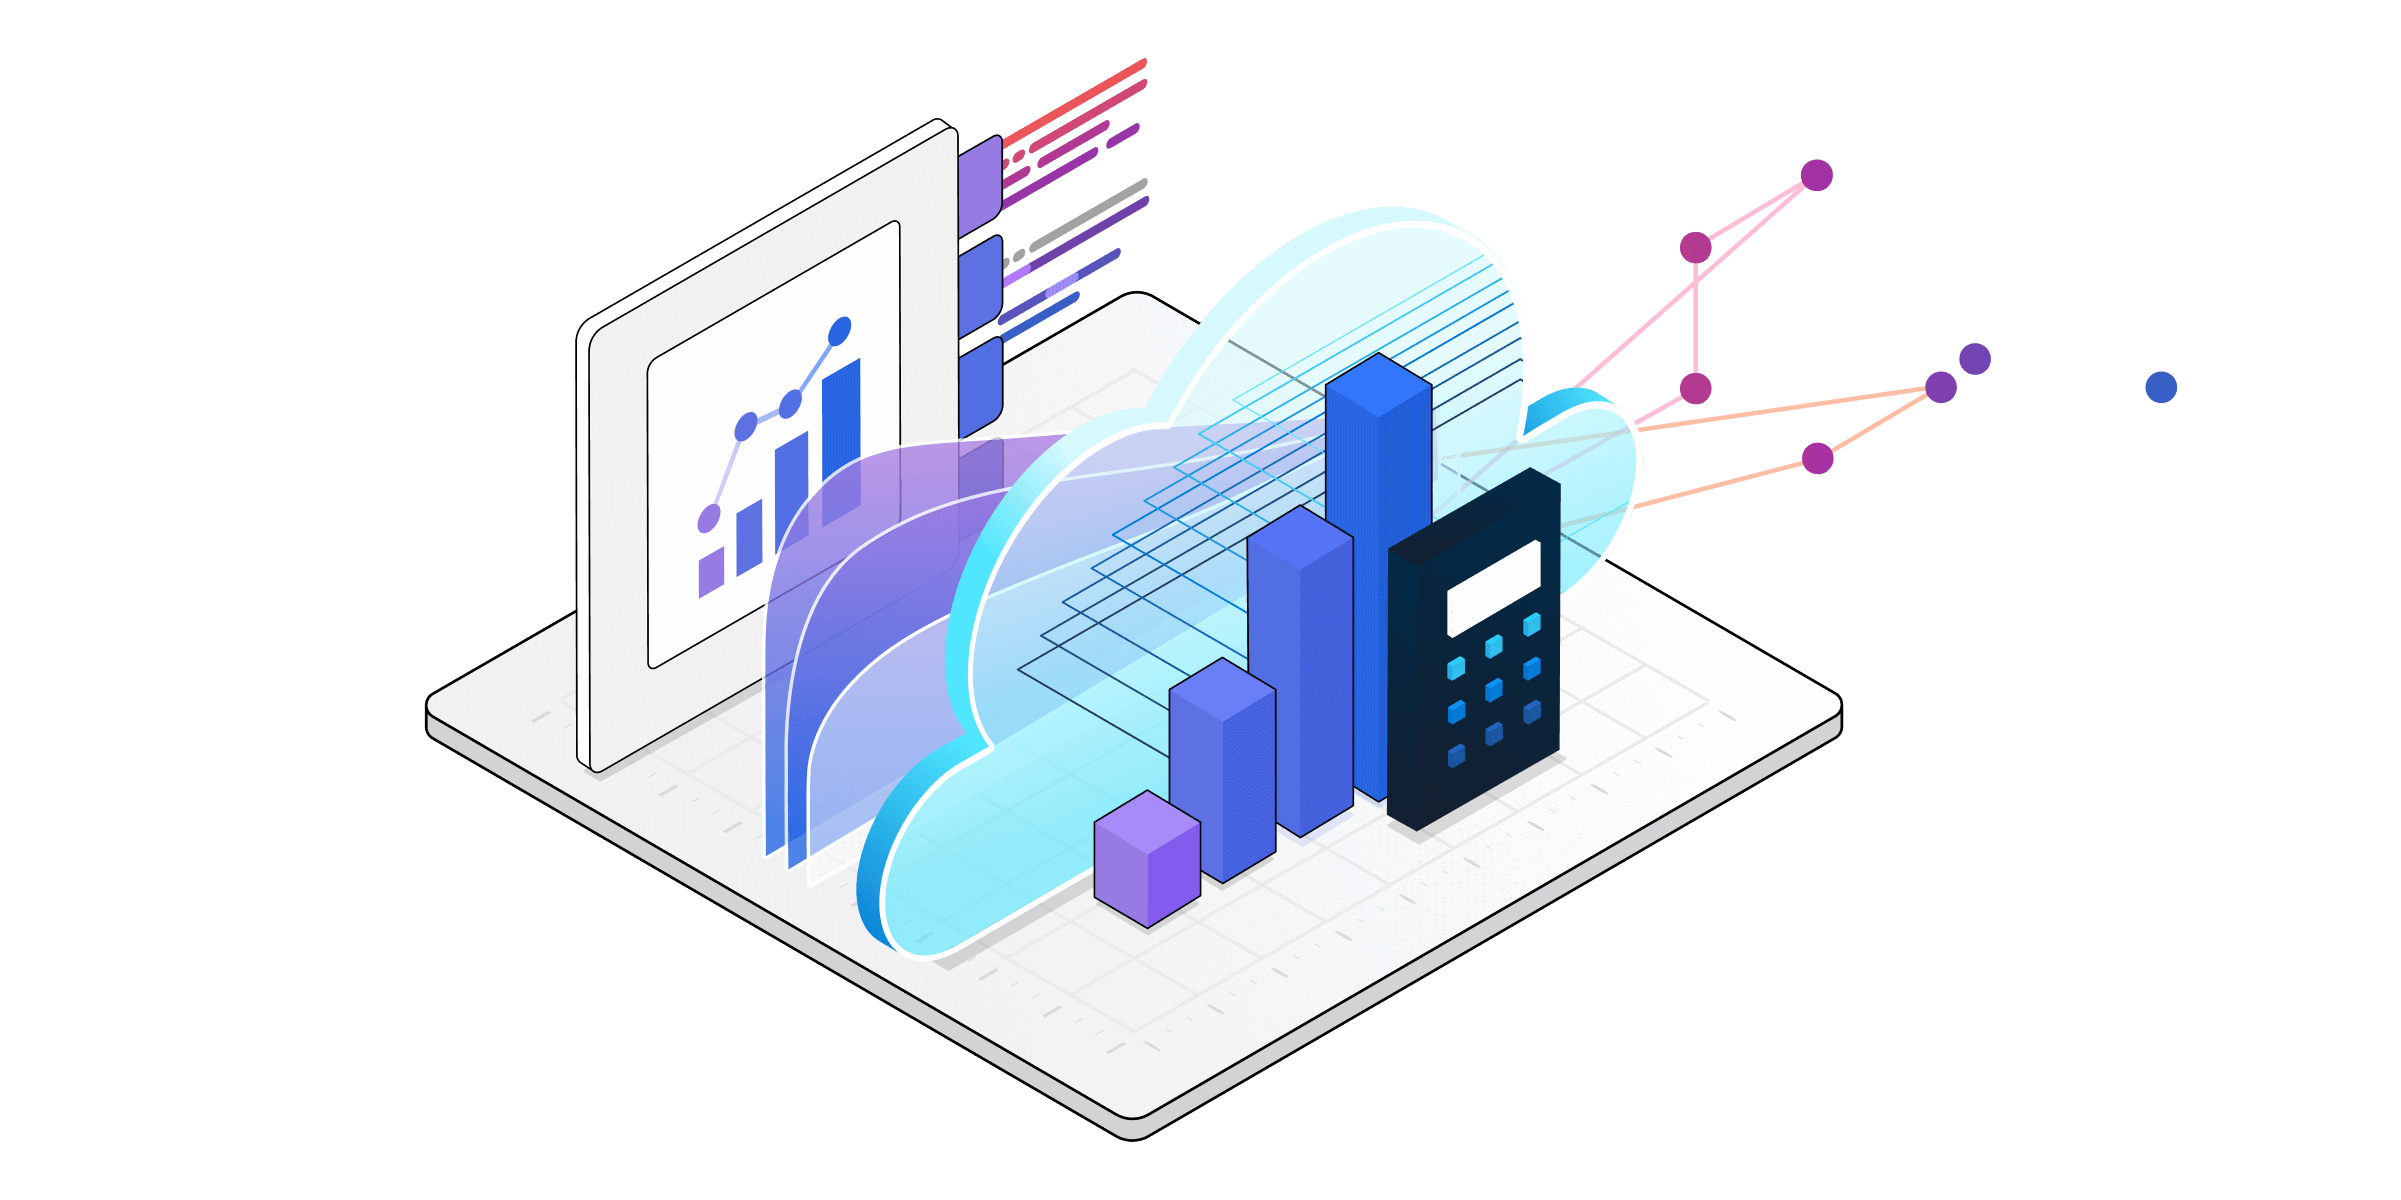 An isometric illustration of technical components for Dynamics 365 services.